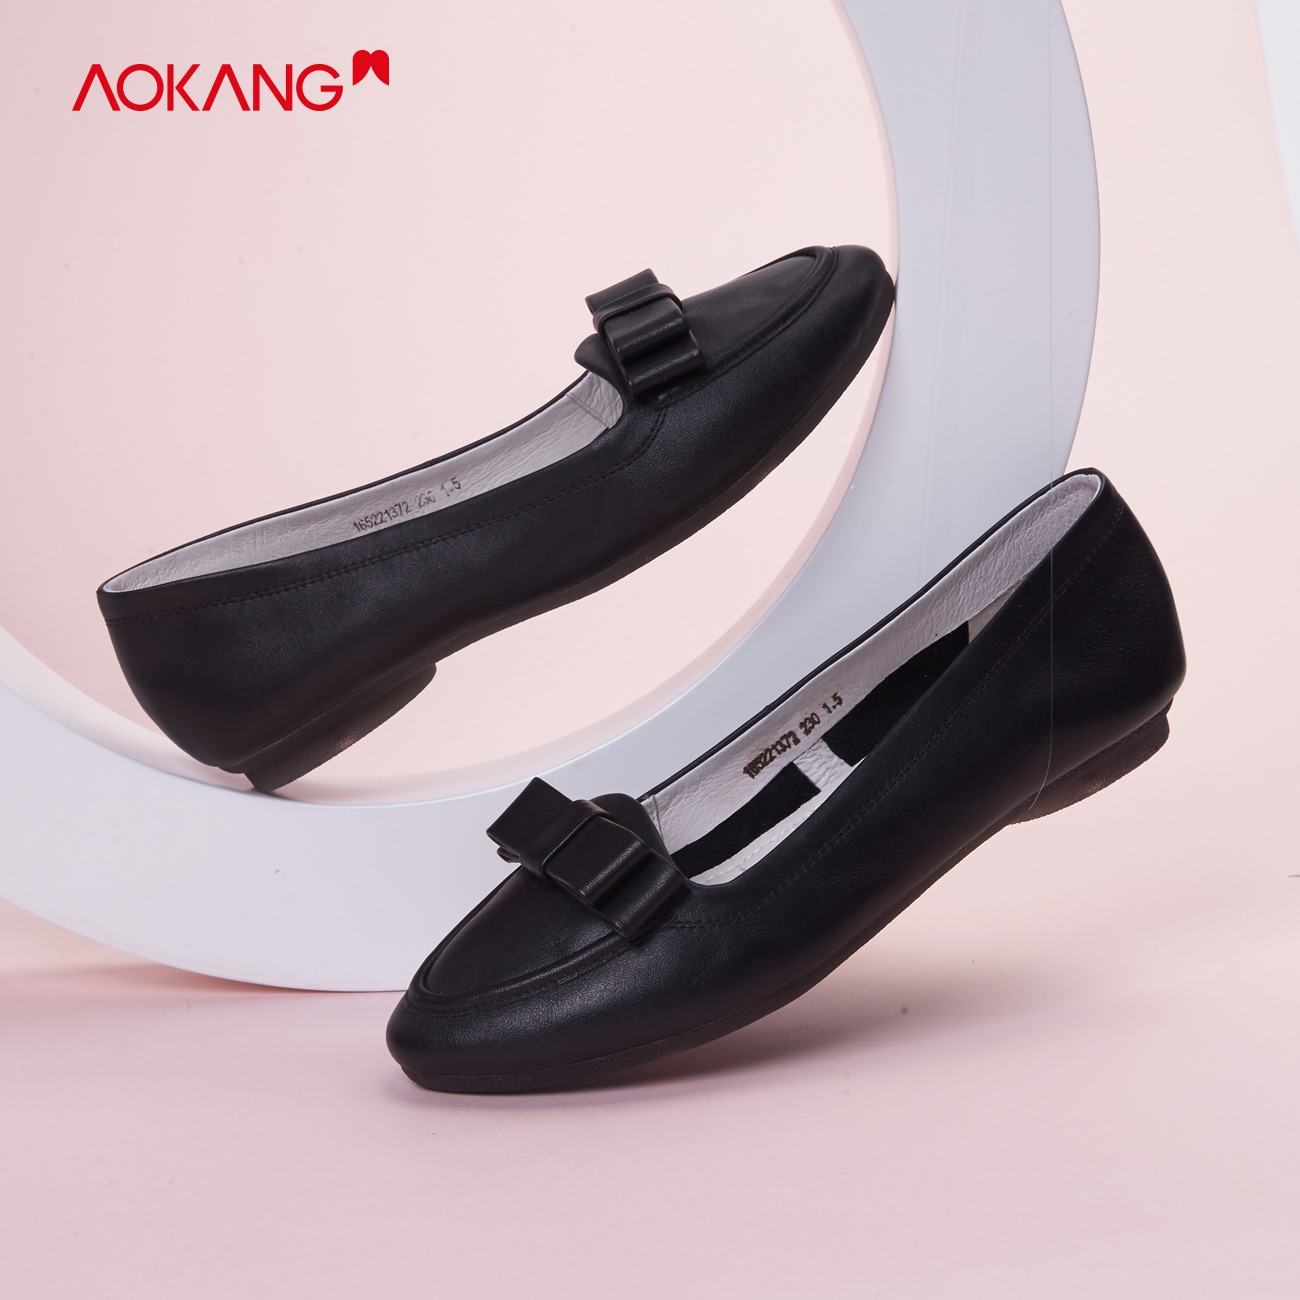 【 Special Offer 】 Aokang Women's Shoes, Women's Single Shoes, Cotton Shoes, Spring, Autumn, Winter Leisure, Lightweight Office Shoes, Women